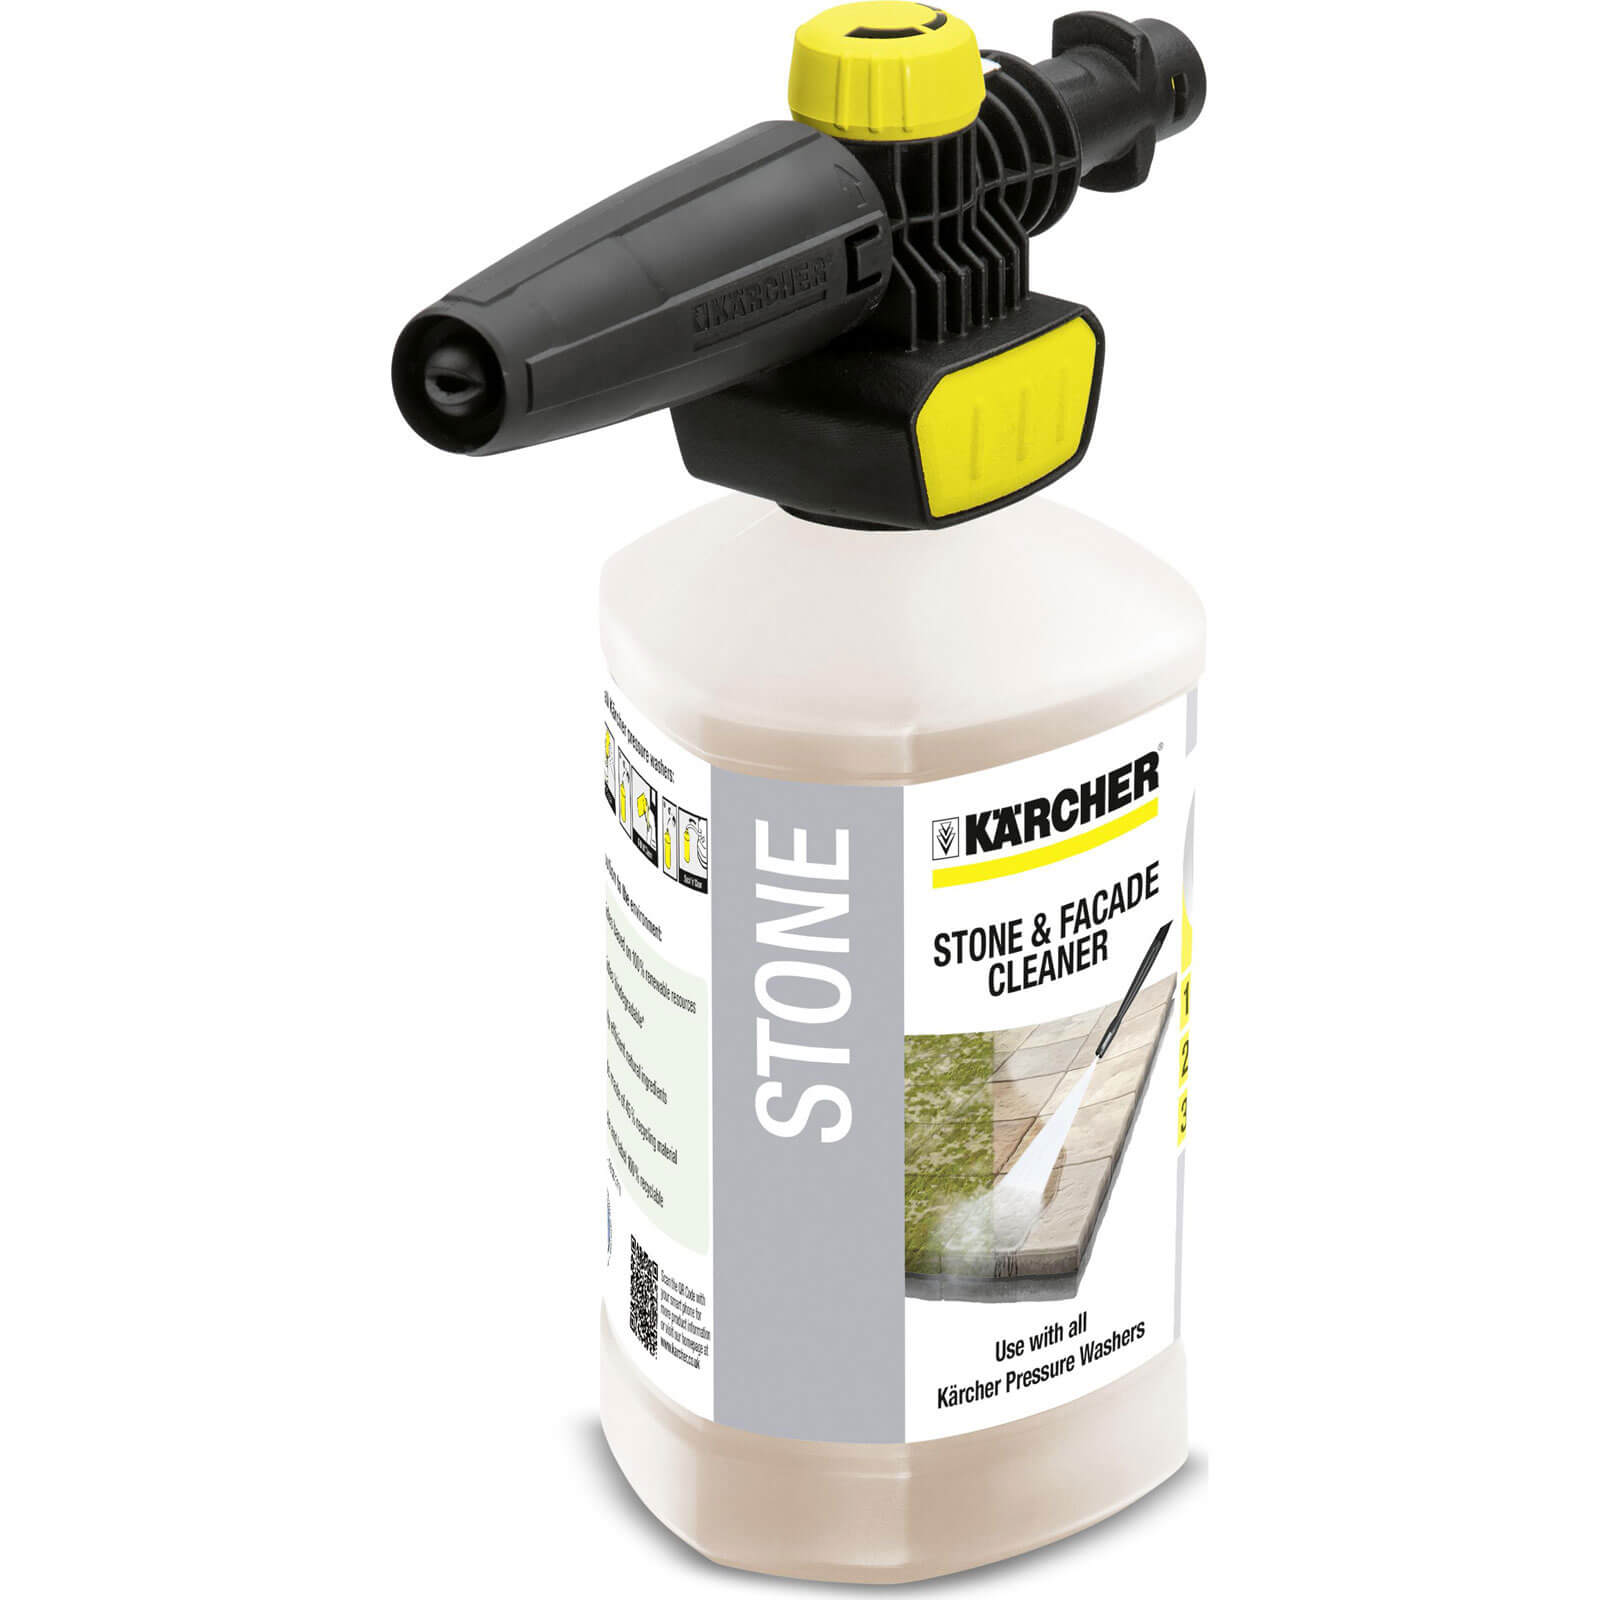 Karcher Plug n Clean Foam Nozzle with Stone Cleaner for K2 - K7 Pressure Washers